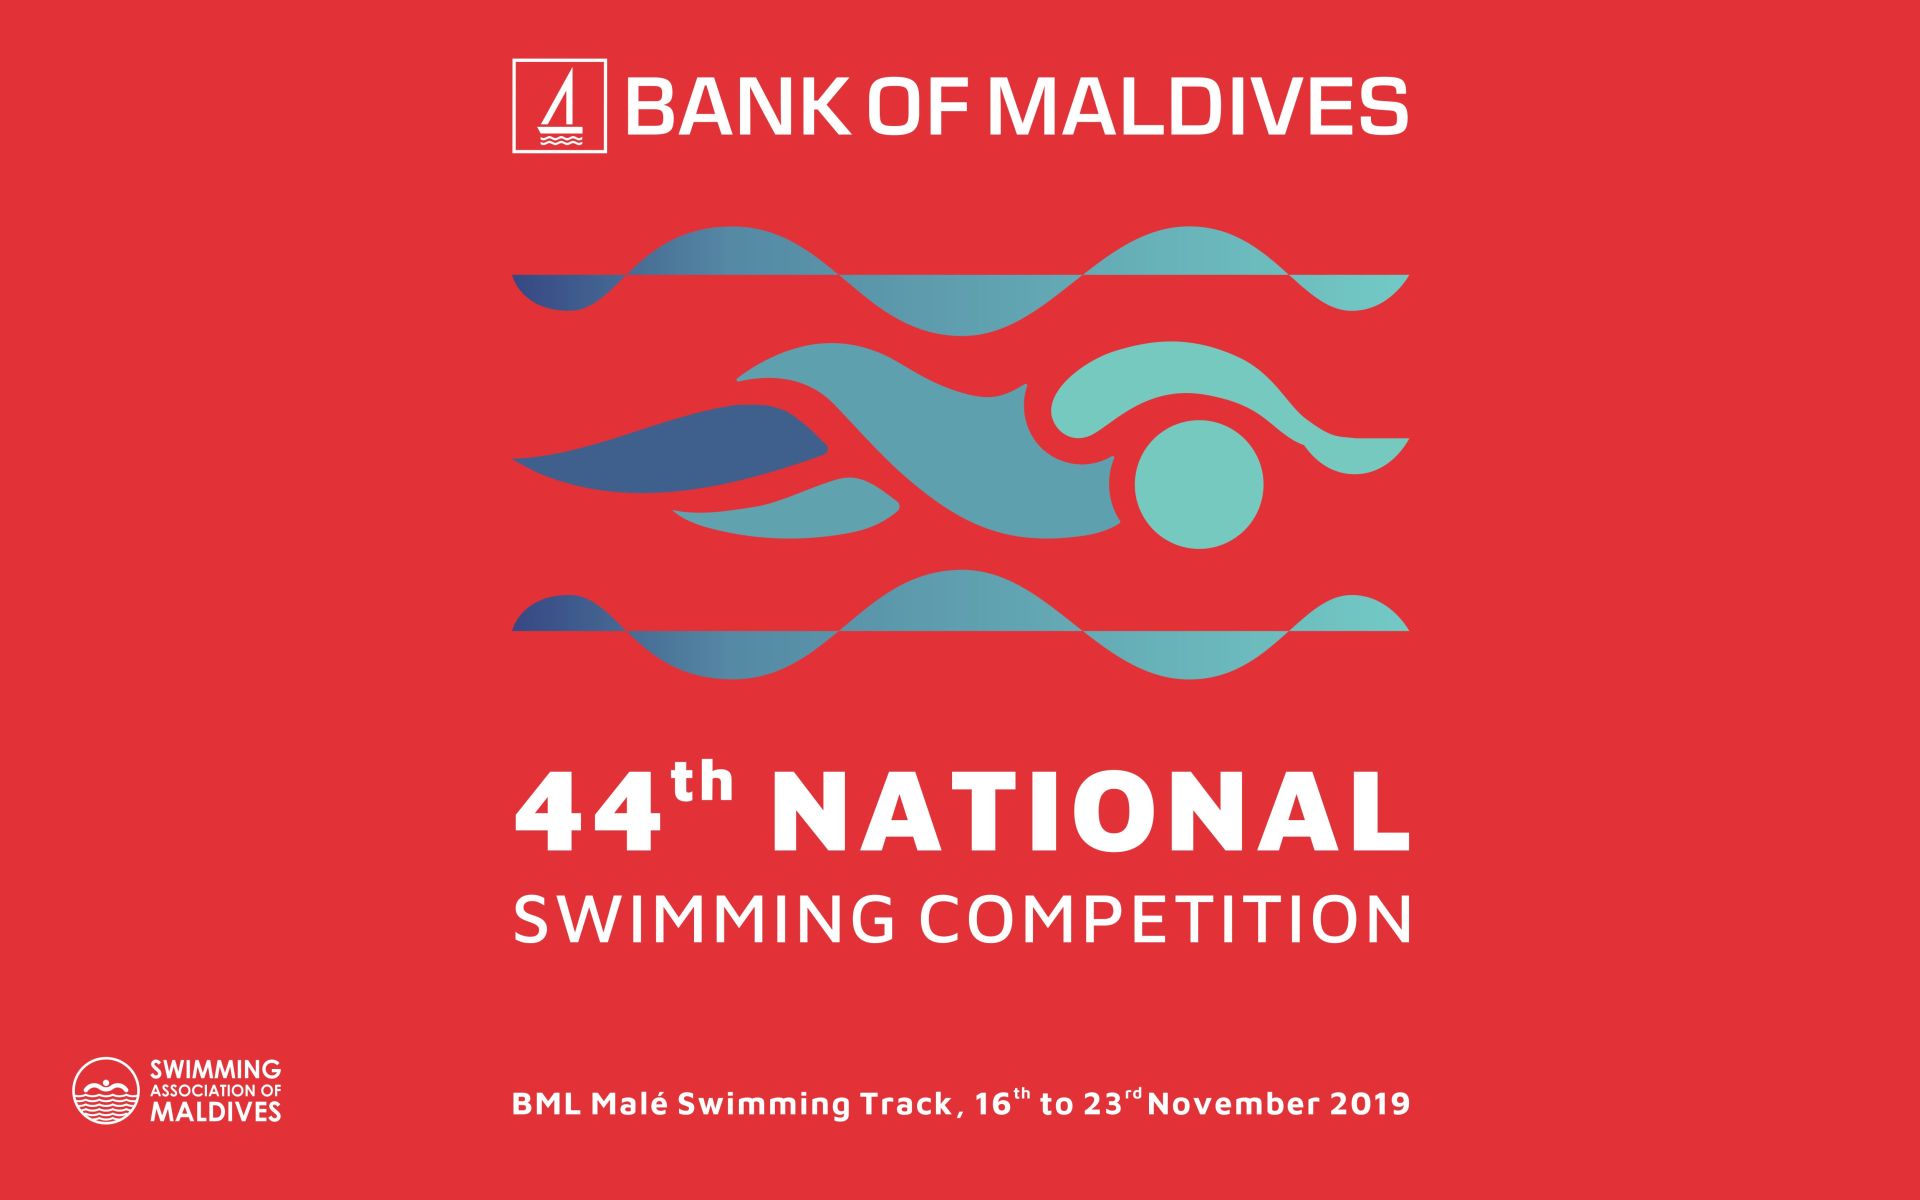 BML 44th National Swimming Competition